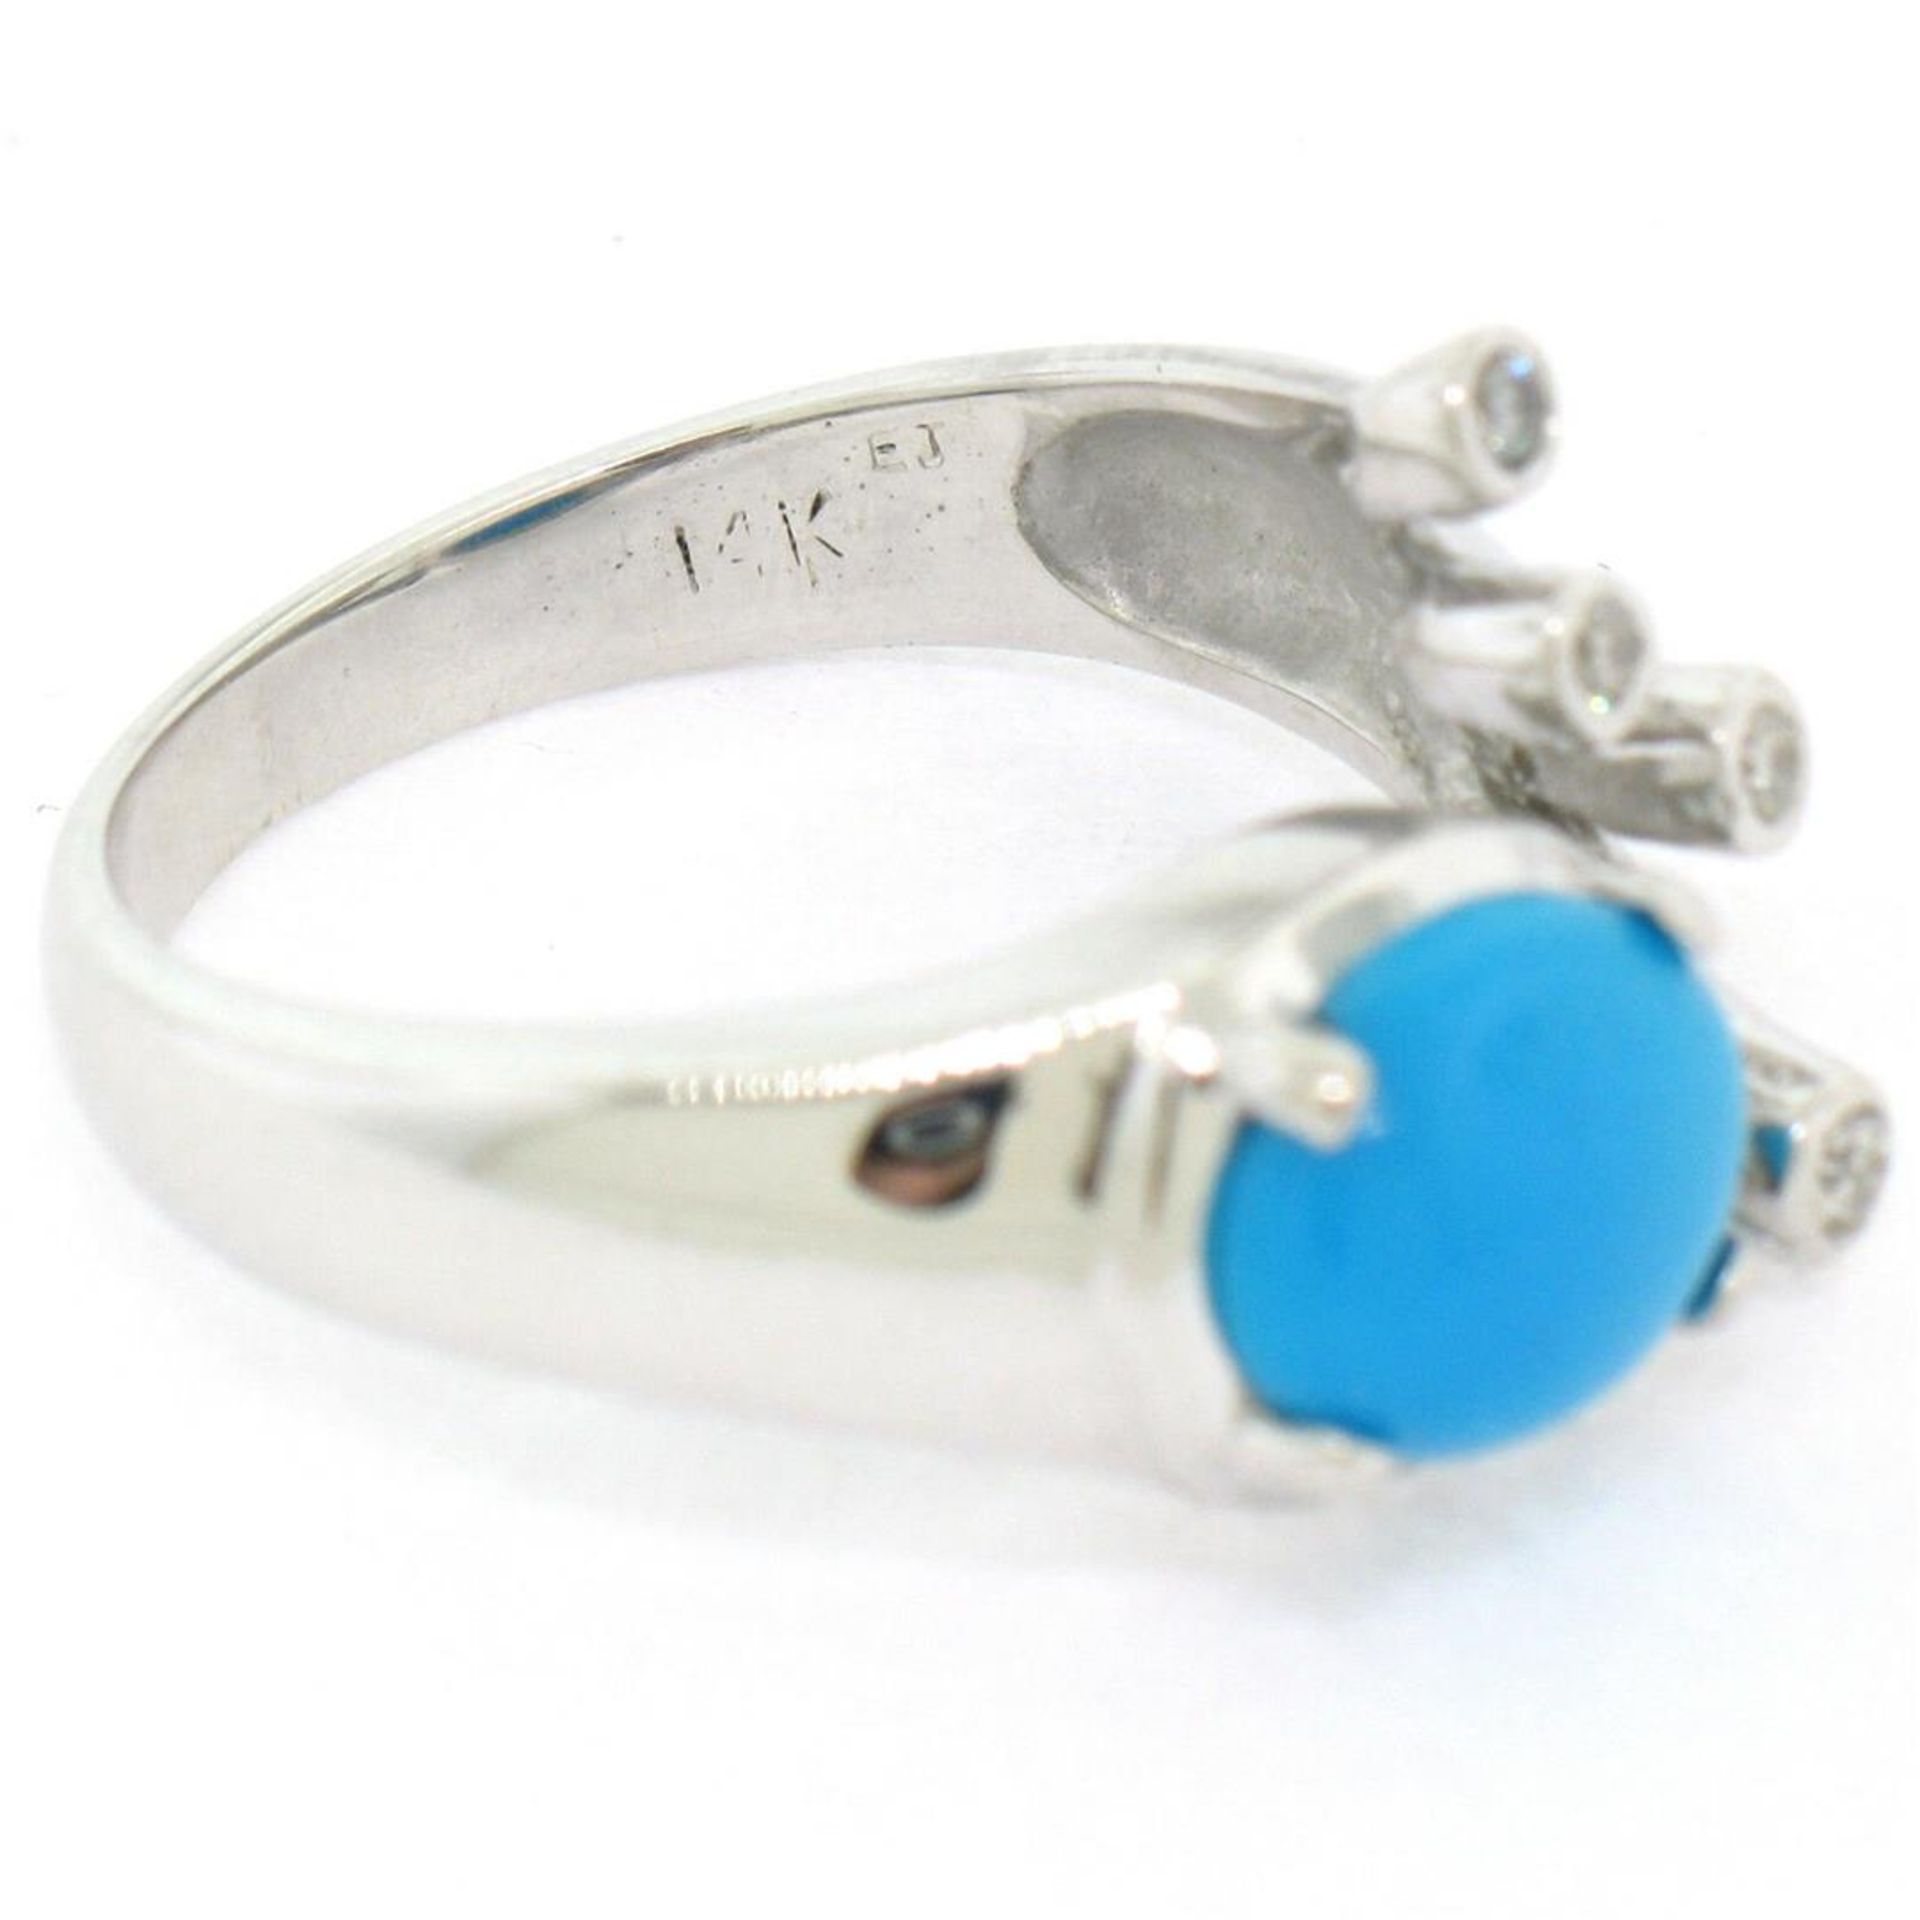 14kt White Gold 1.23 ctw Cabochon Turquoise and Diamond Cocktail Ring - Image 7 of 7